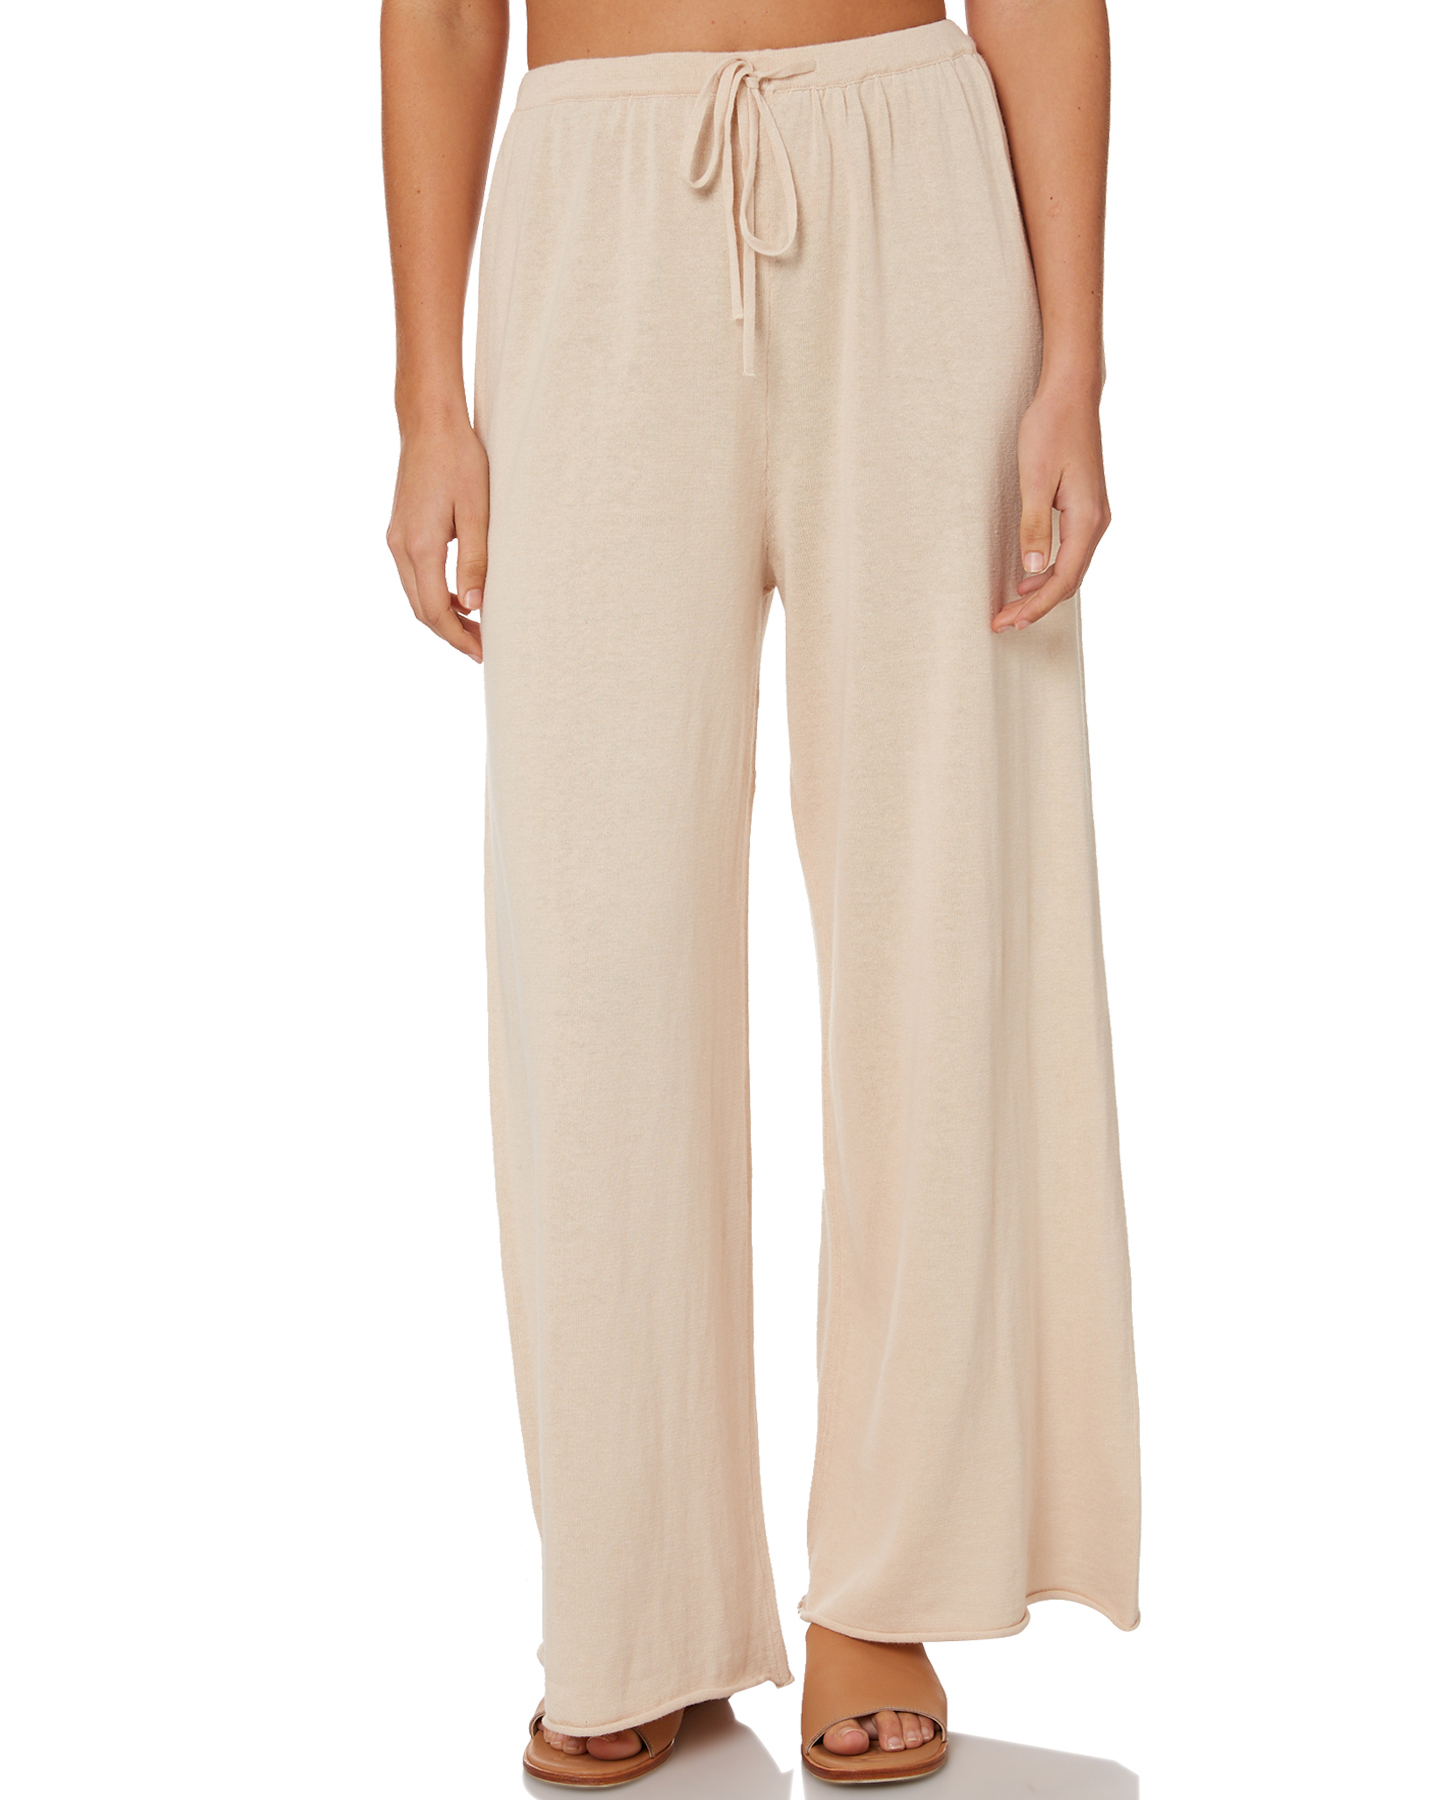 Zulu And Zephyr Lounge Knit Pant - Beige | SurfStitch